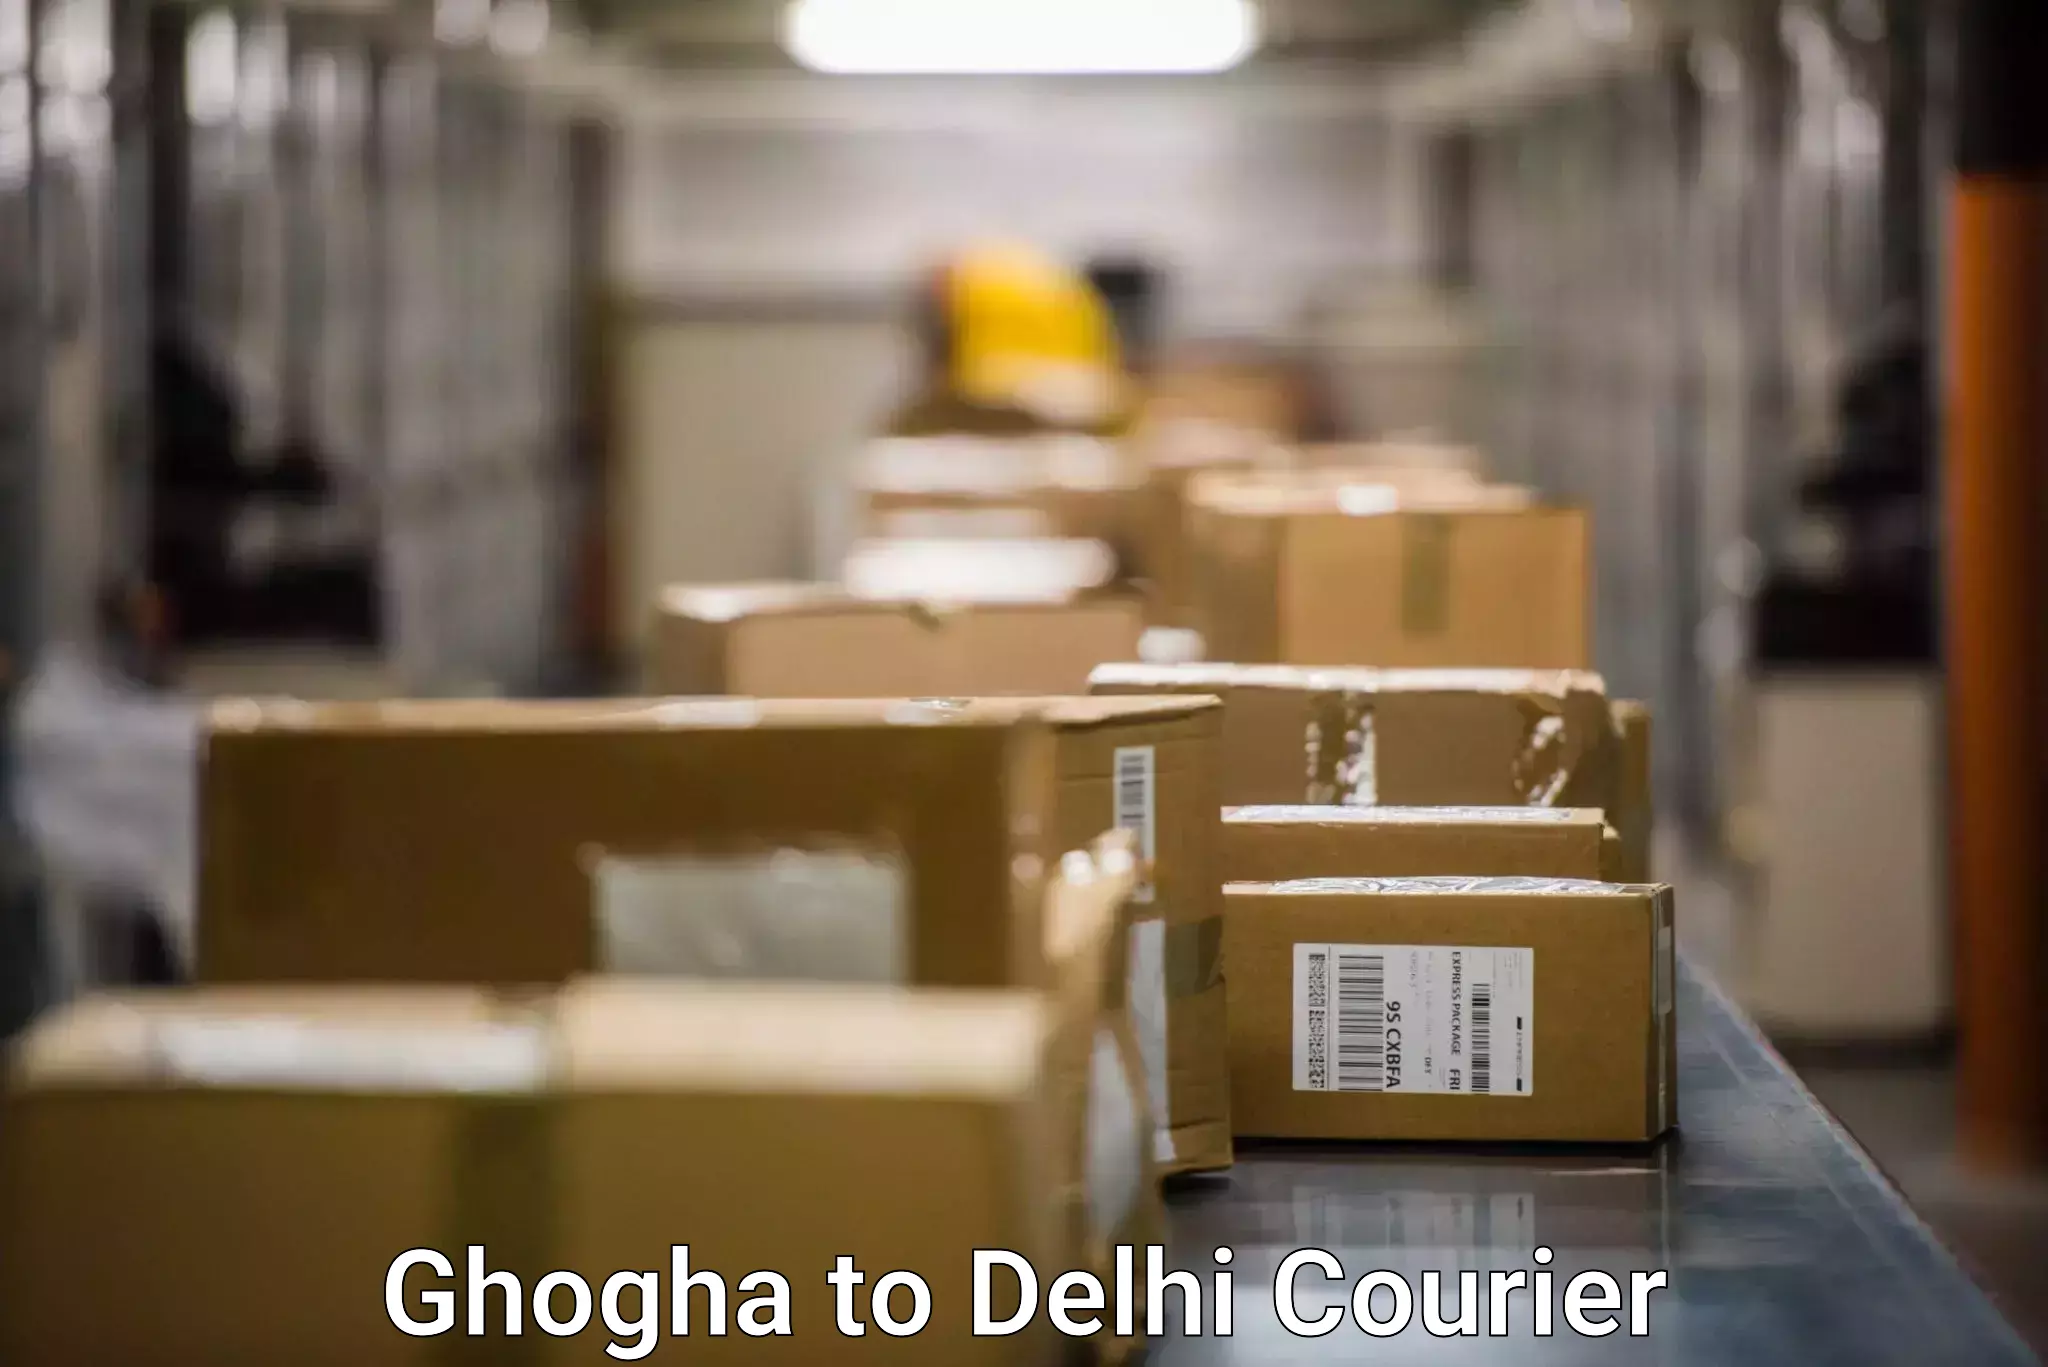 24-hour courier service Ghogha to University of Delhi